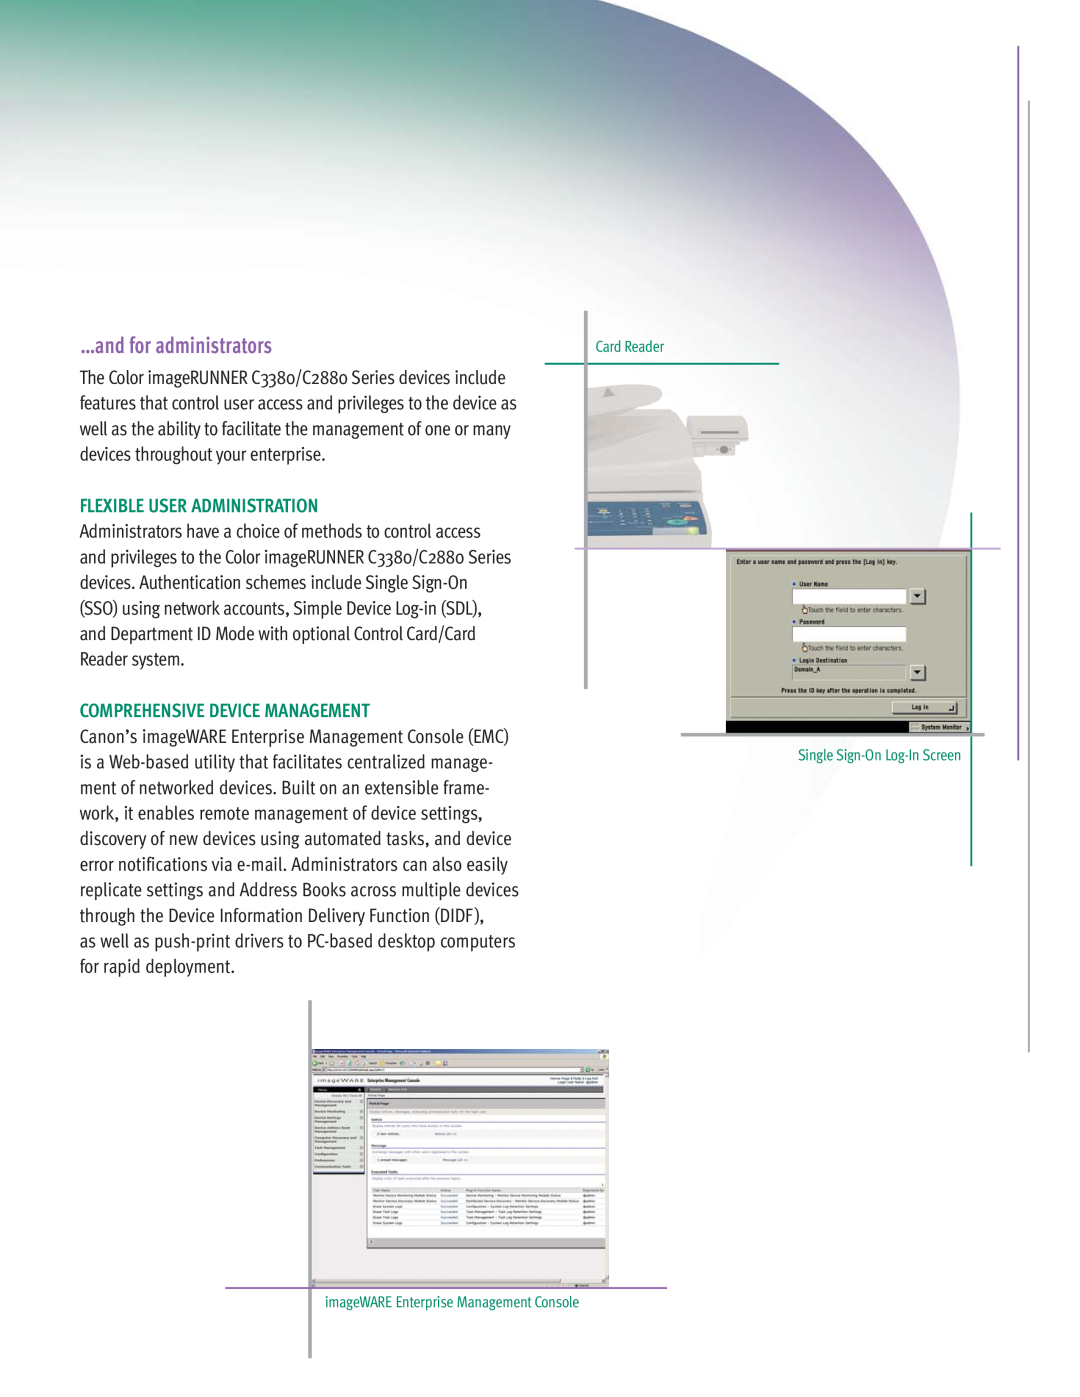 Canon C3380 Series manual …and for administrators, Flexible User Administration, Comprehensive Device Management 